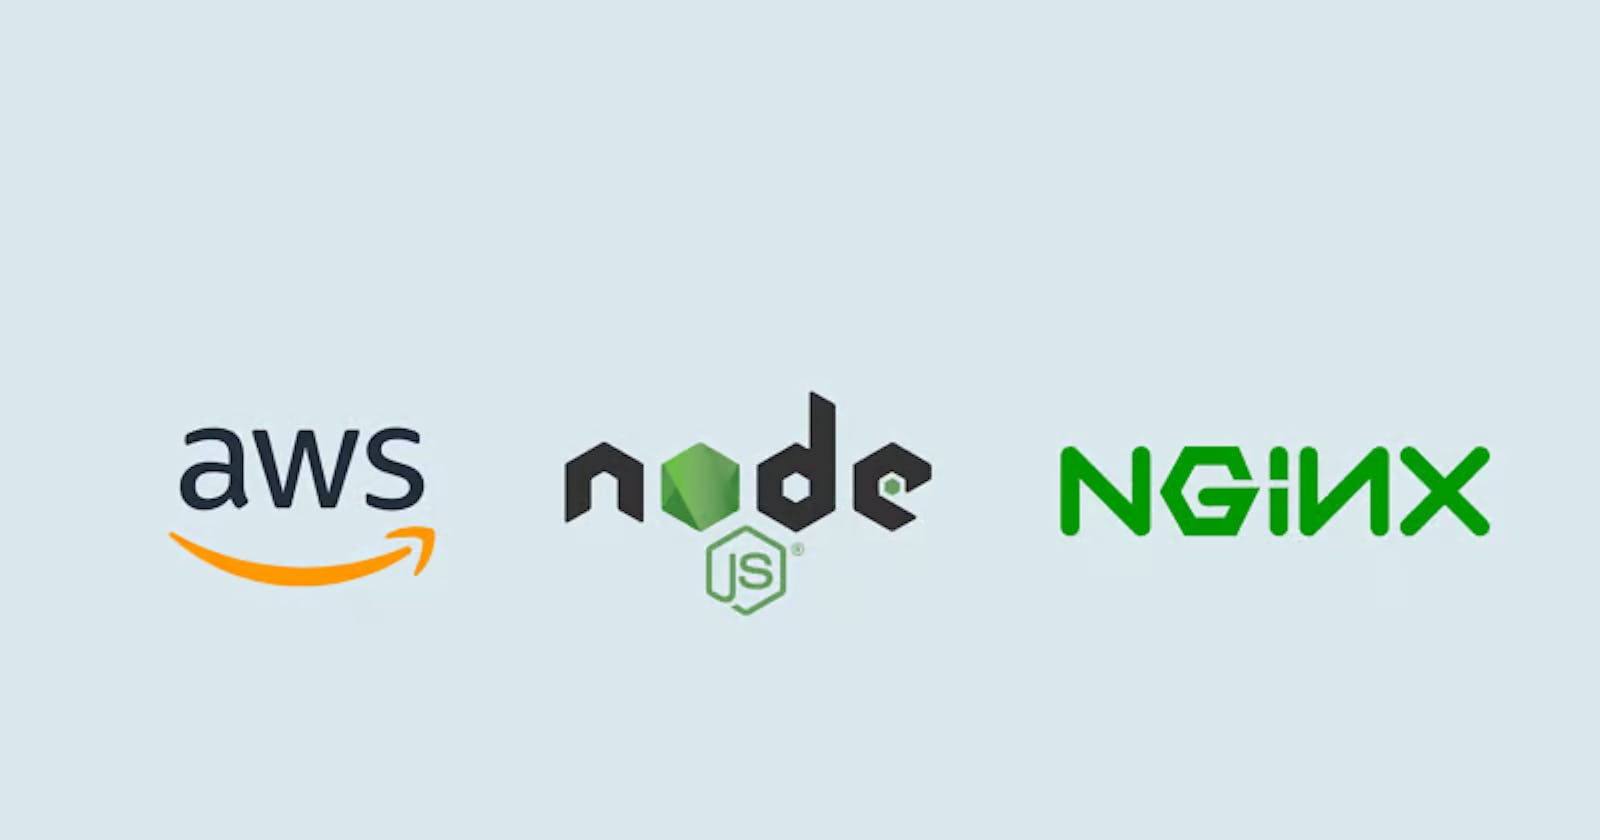 Deploying a Node.js Application on AWS EC2 with Nginx and Enabling SSL Certificate